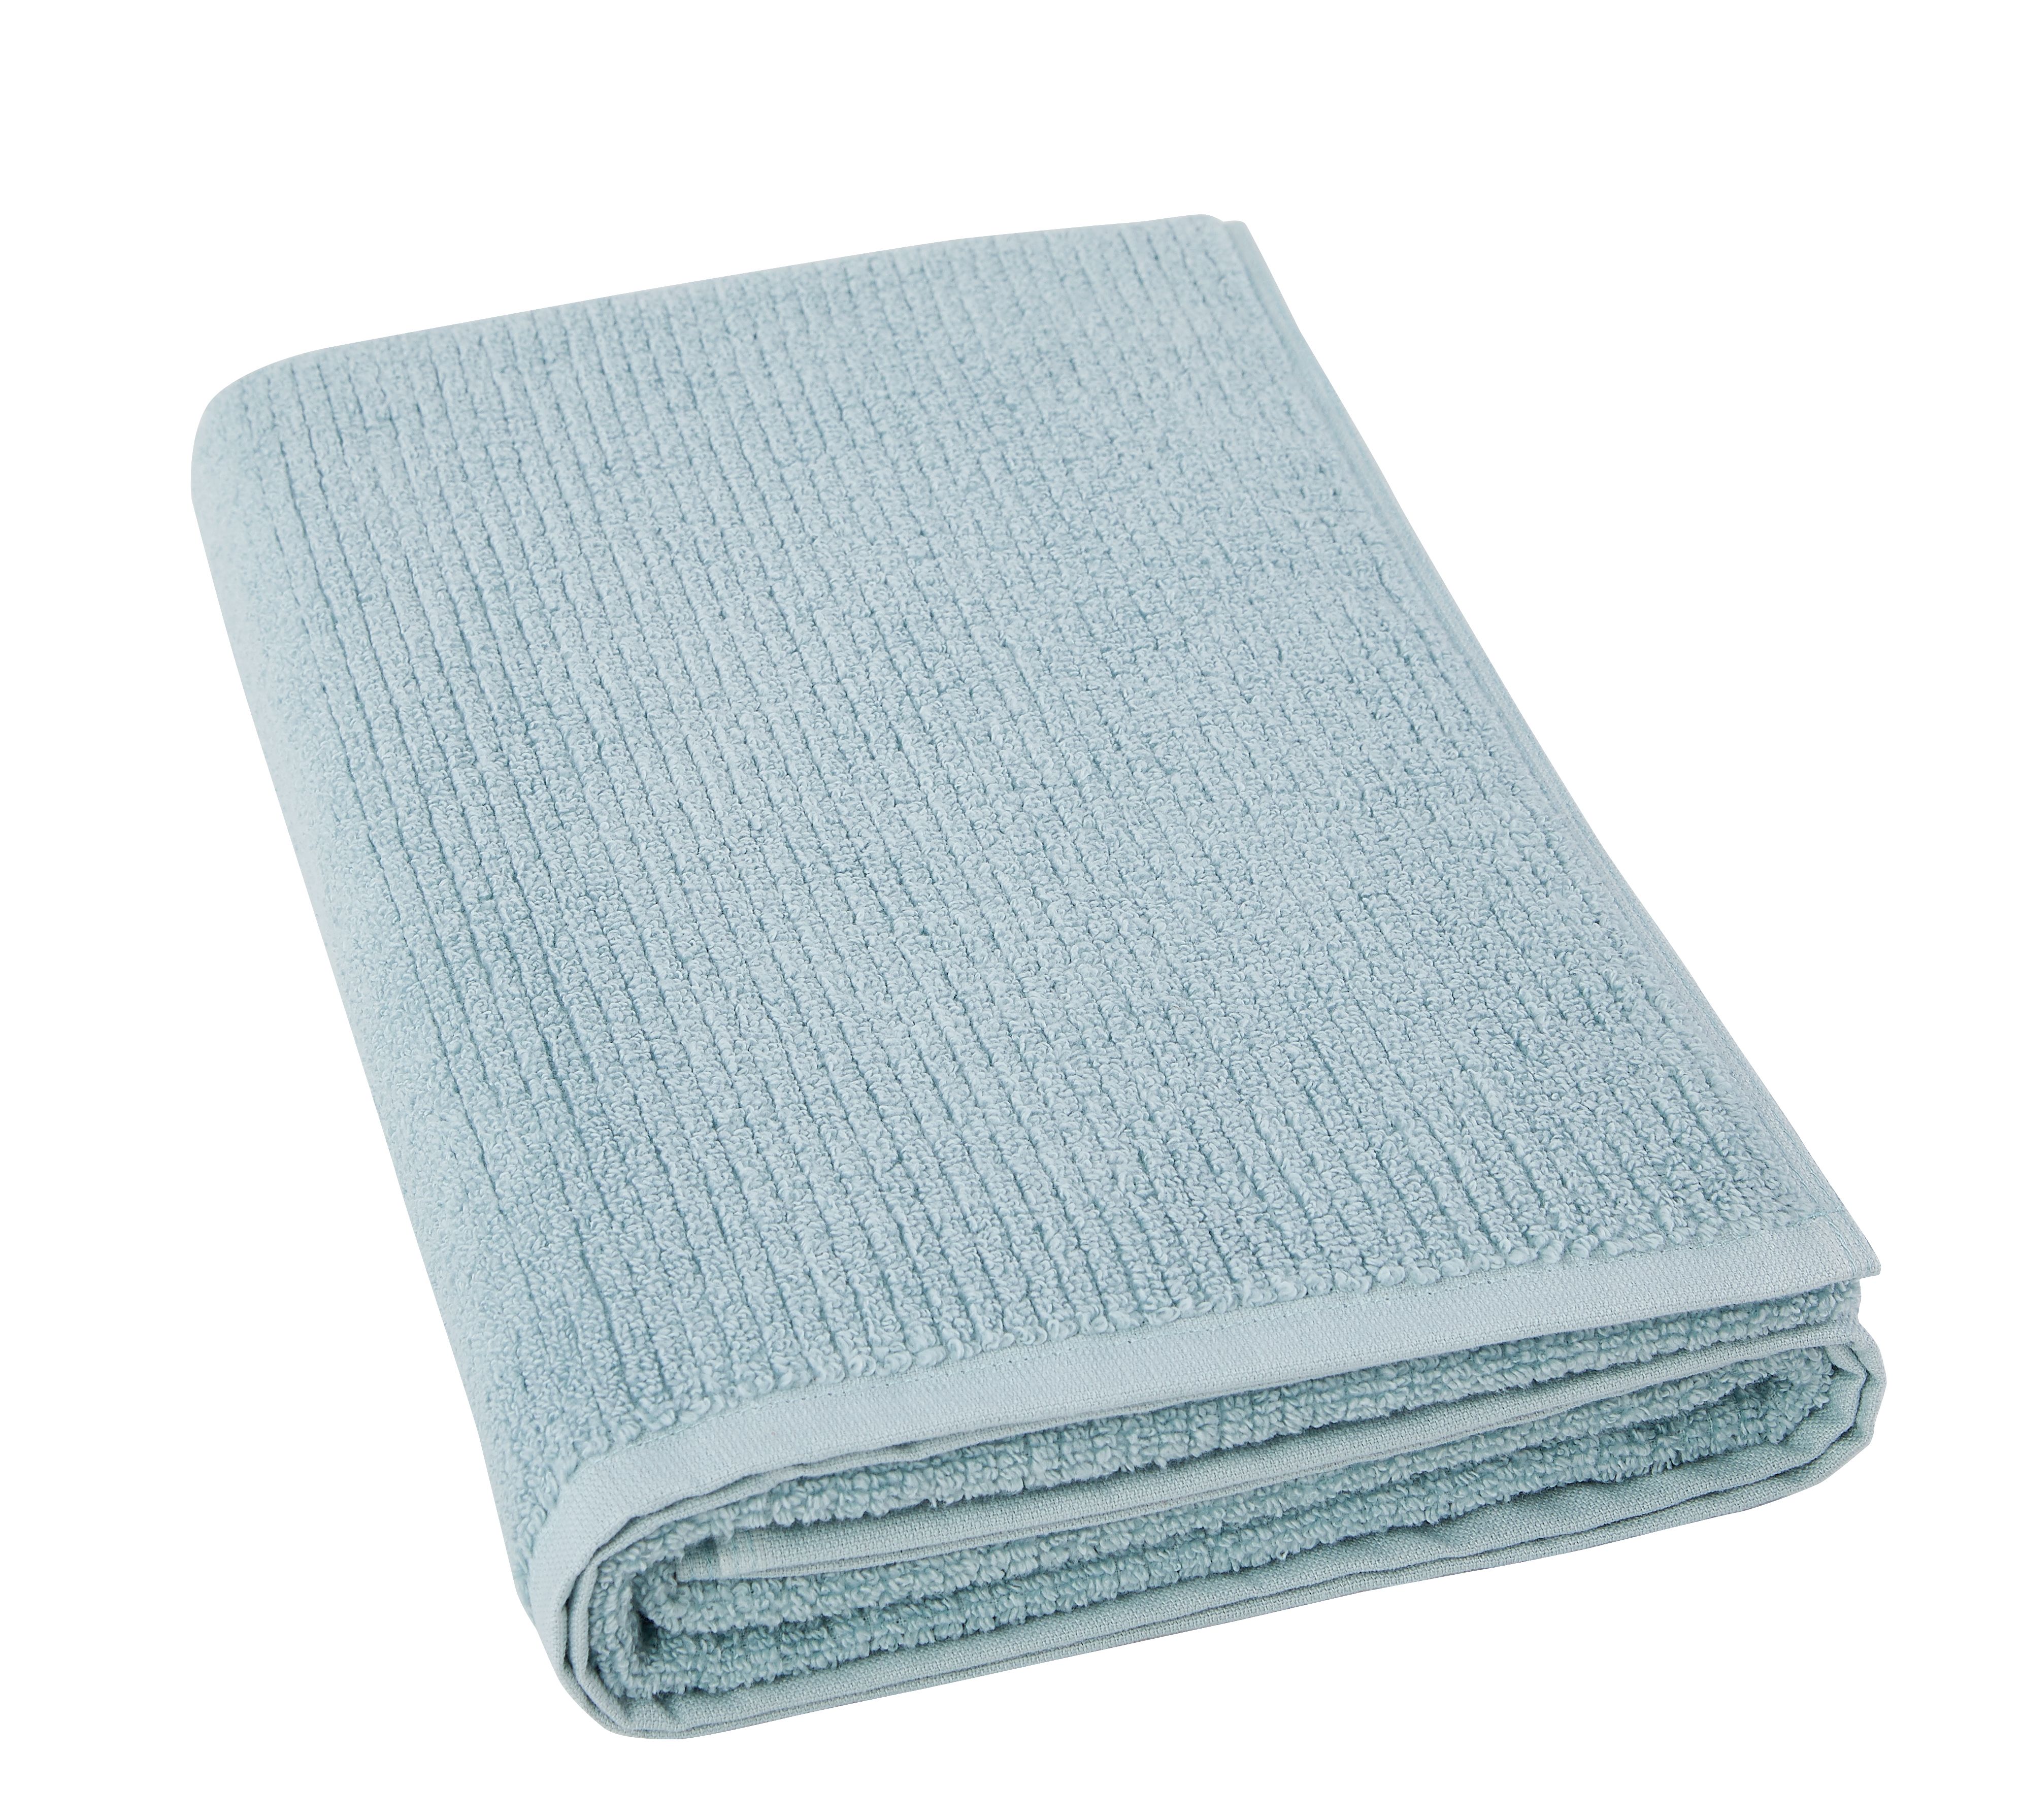 Ultra-soft ribbed terry towels for quick-dry comfort. Finished with a locker loop and printed logo detailing on reverse. Available in White, Pebble, Midnight, Charcoal, Sky, Juniper and Petrol Blue.